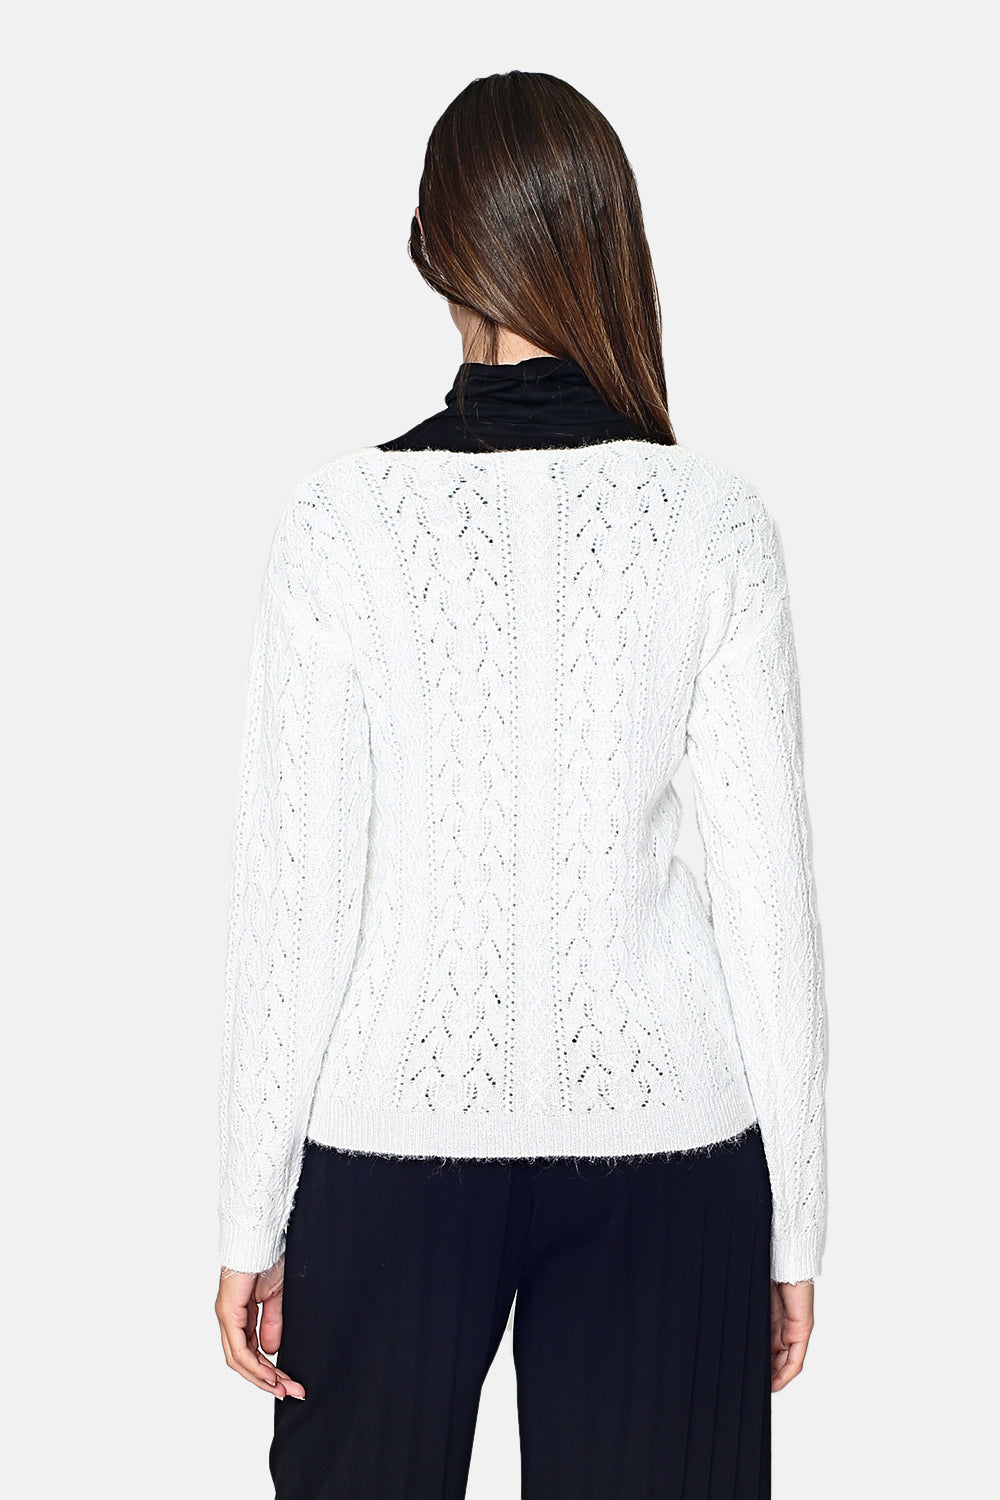 Fancy knit cardigan To wear as a cardigan with a V neckline in front or as a sweater with an opening in the back